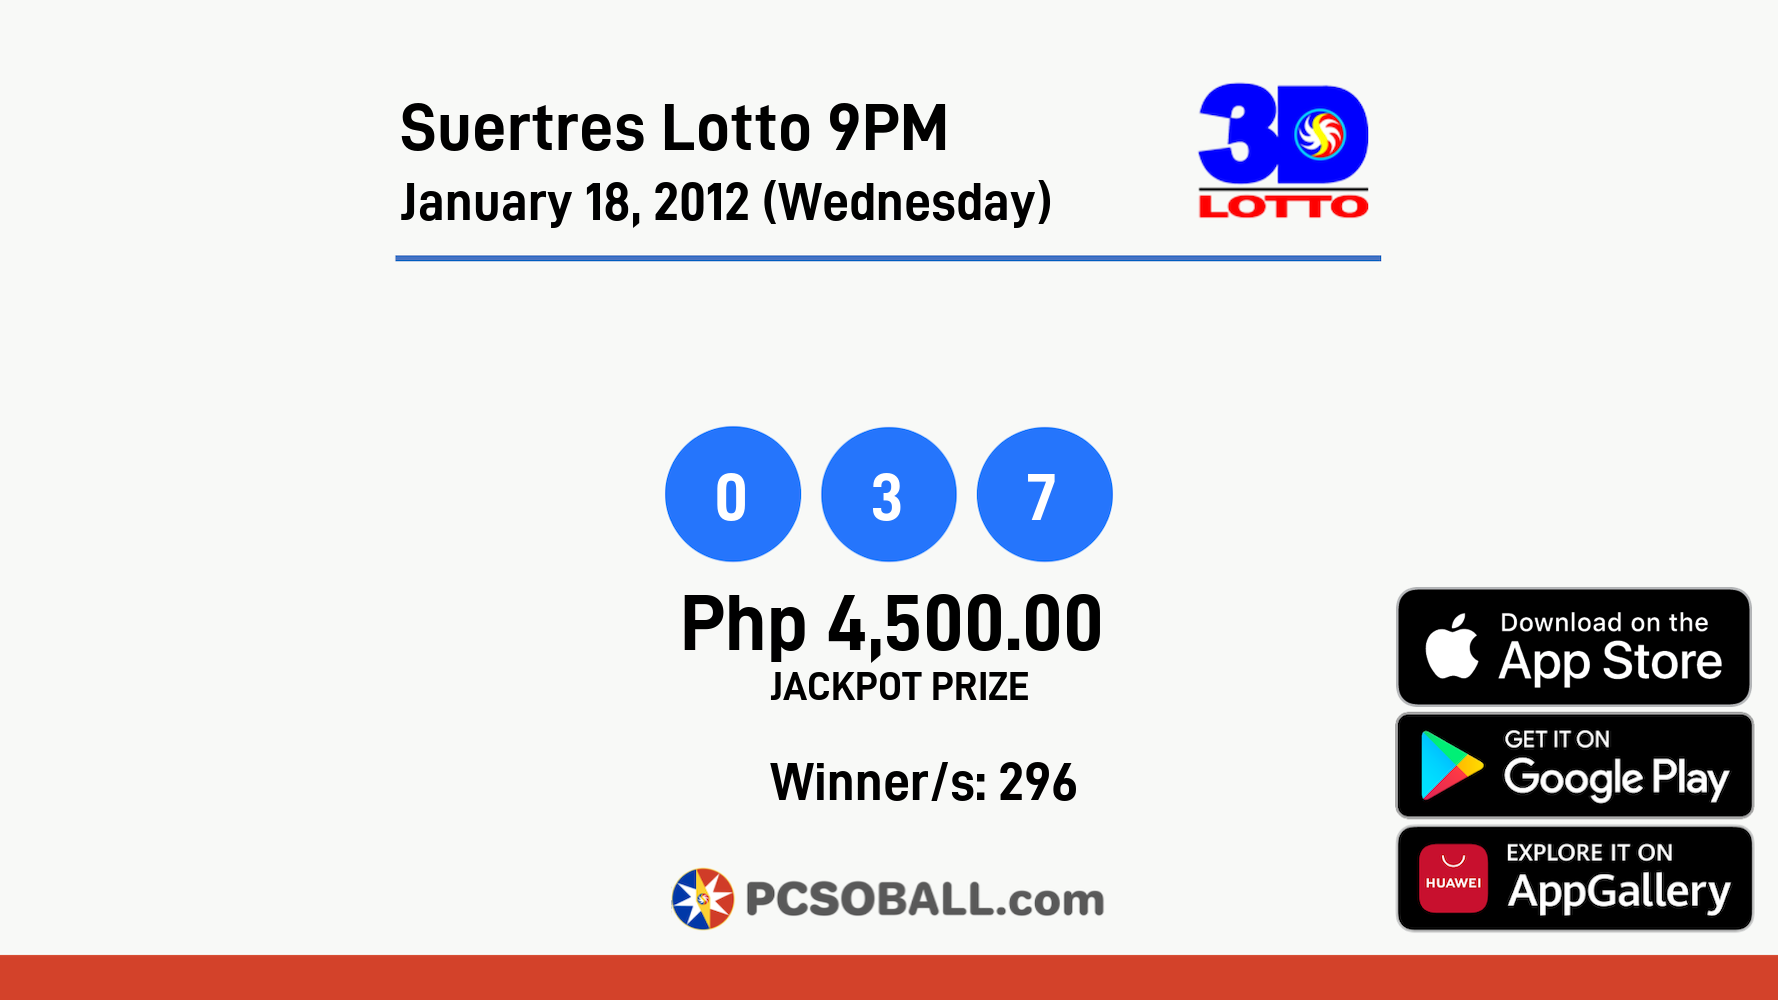 Suertres Lotto 9PM January 18, 2012 (Wednesday) Result